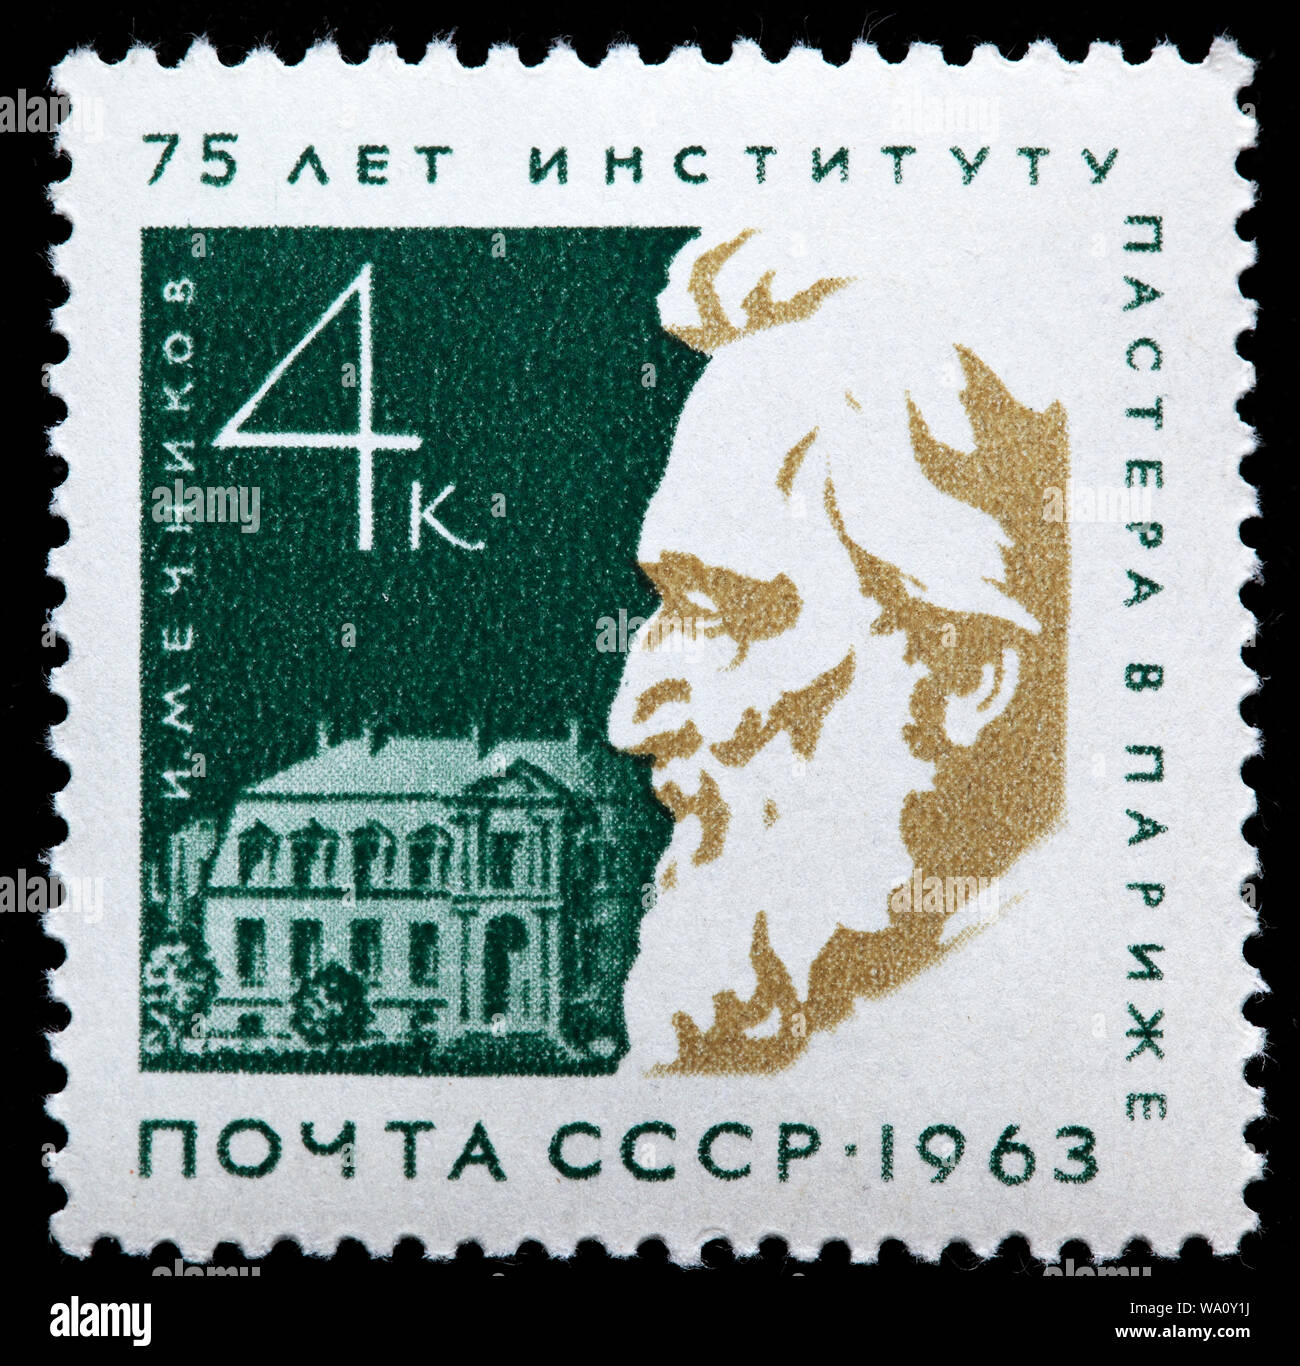 Ilya Mechnikov (1845-1916), Russian microbiologist, 1908 Nobel Prize in Physiology or Medicine, 75th Anniversary of Pasteur Institute in Paris, postag Stock Photo